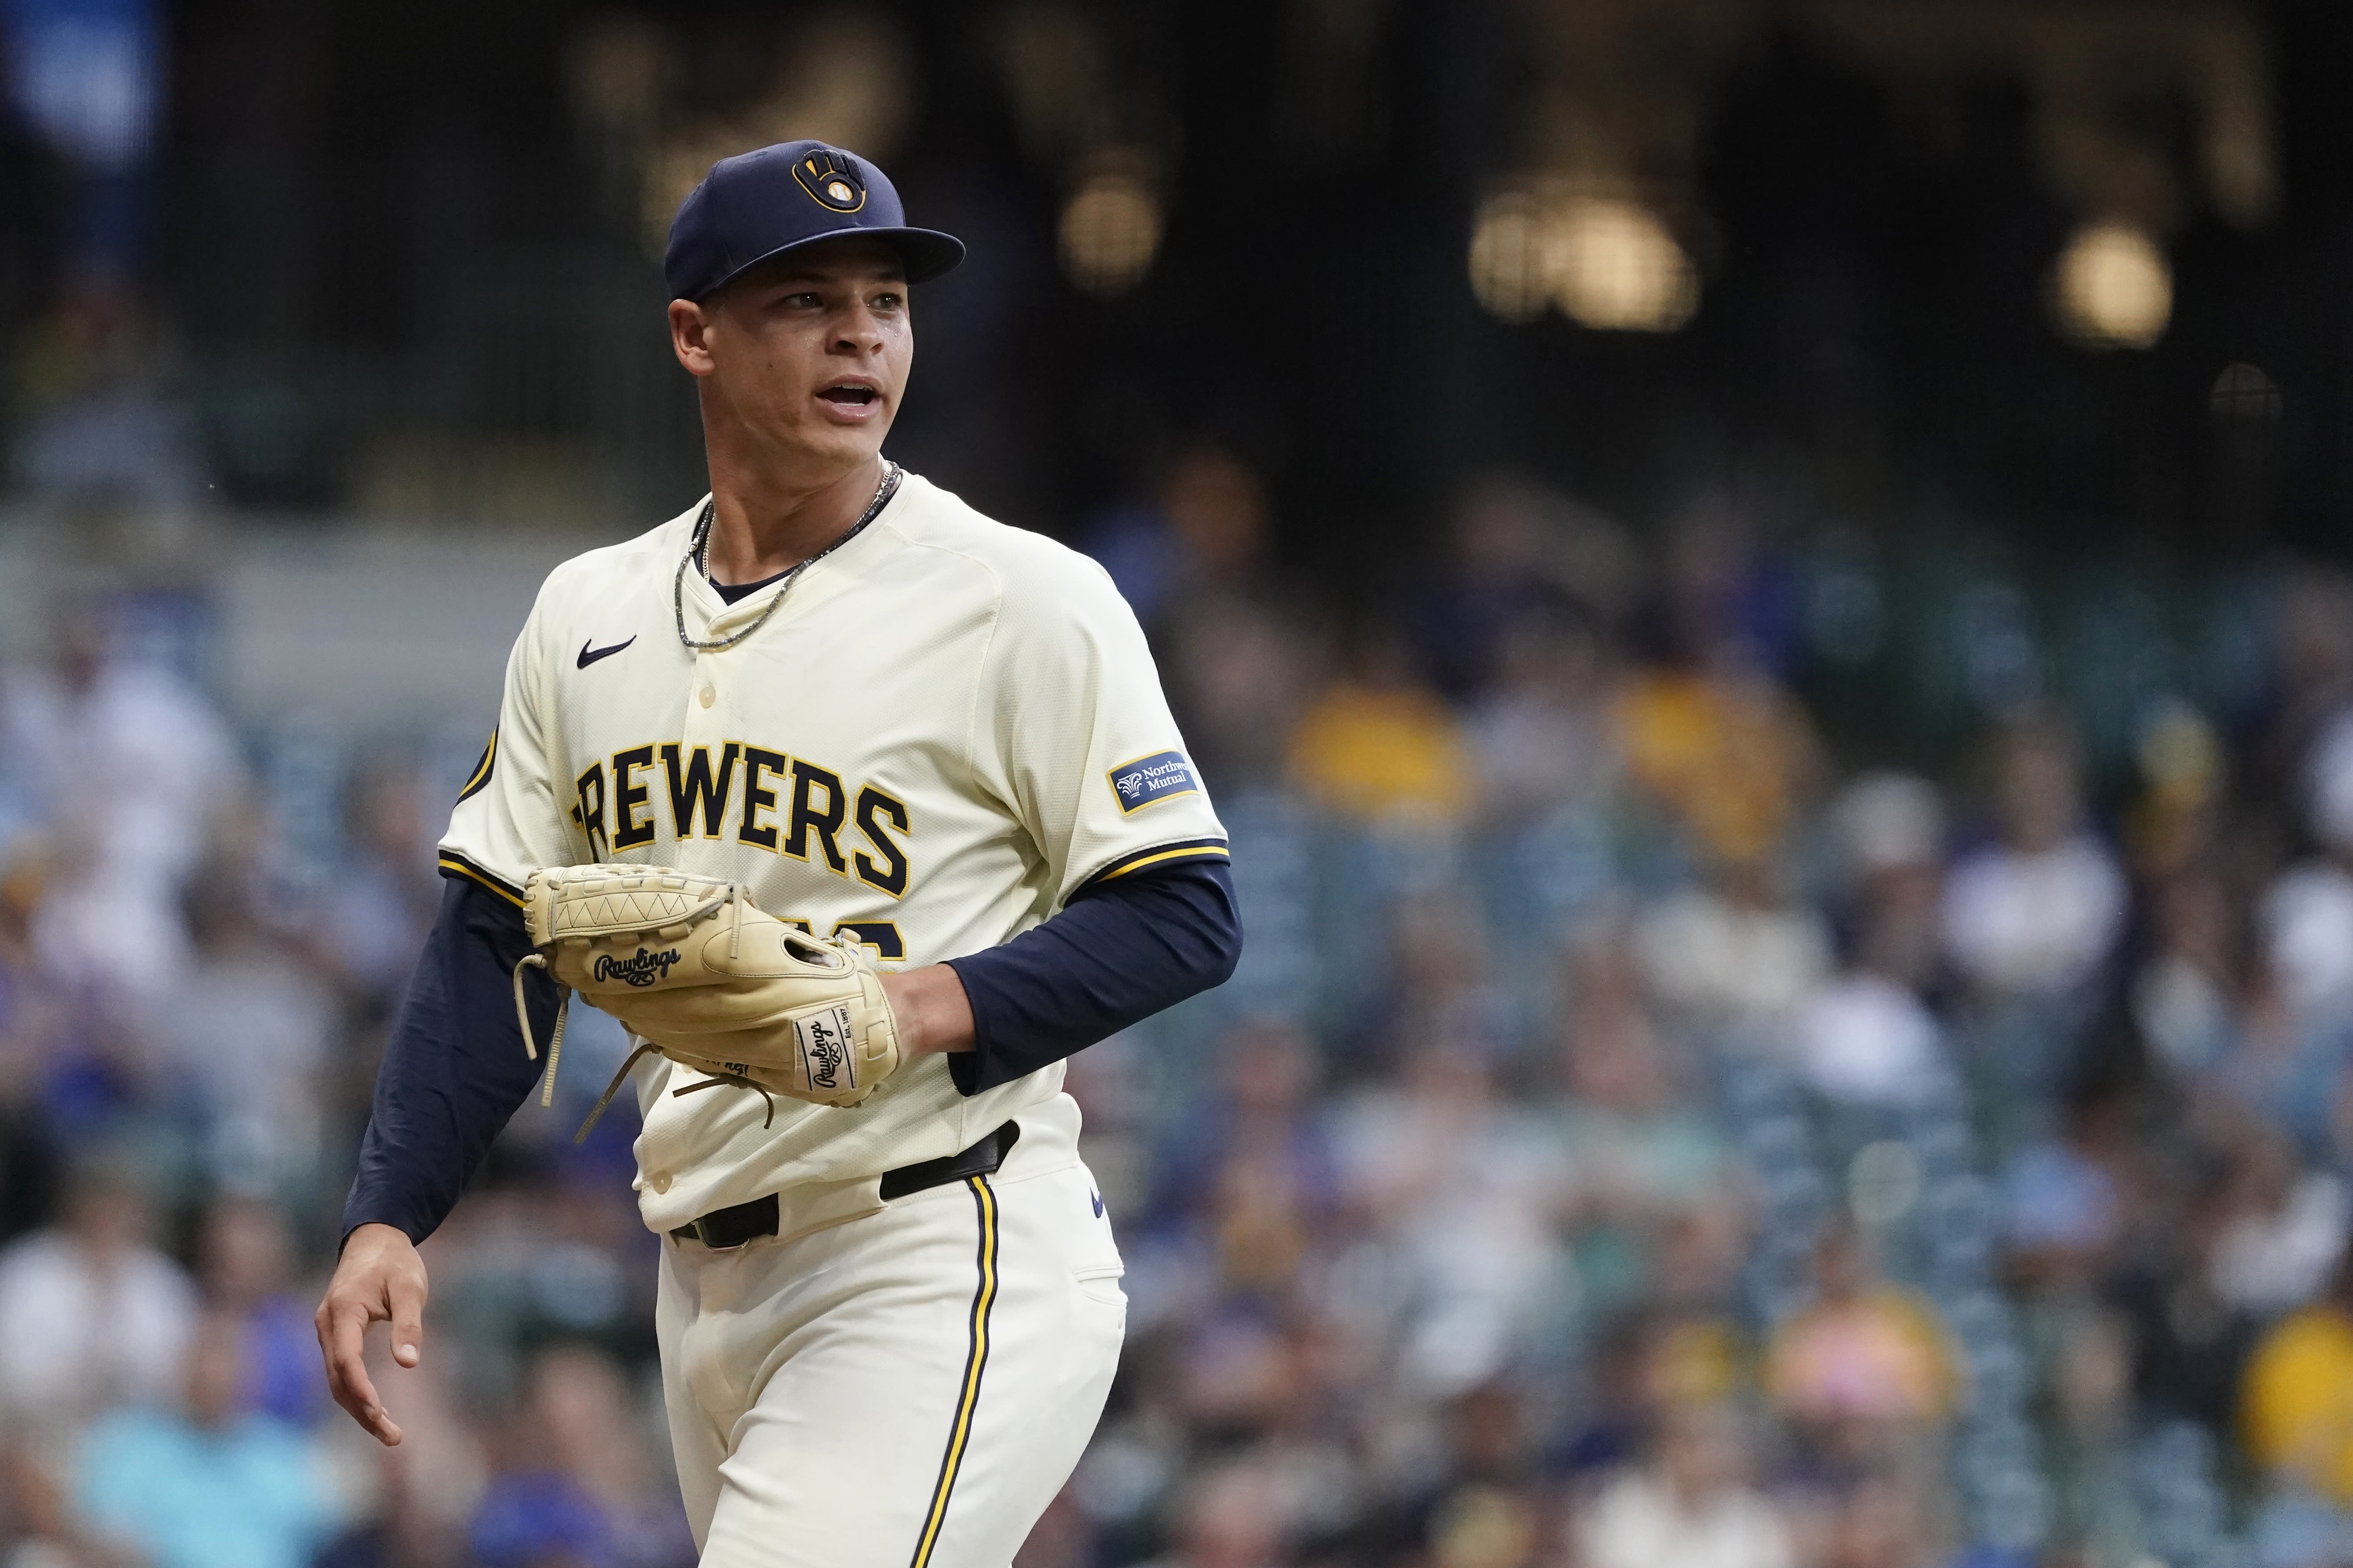 Myers tosses 8 scoreless innings, Hoskins and Adames homer as Brewers blank Pirates 9-0